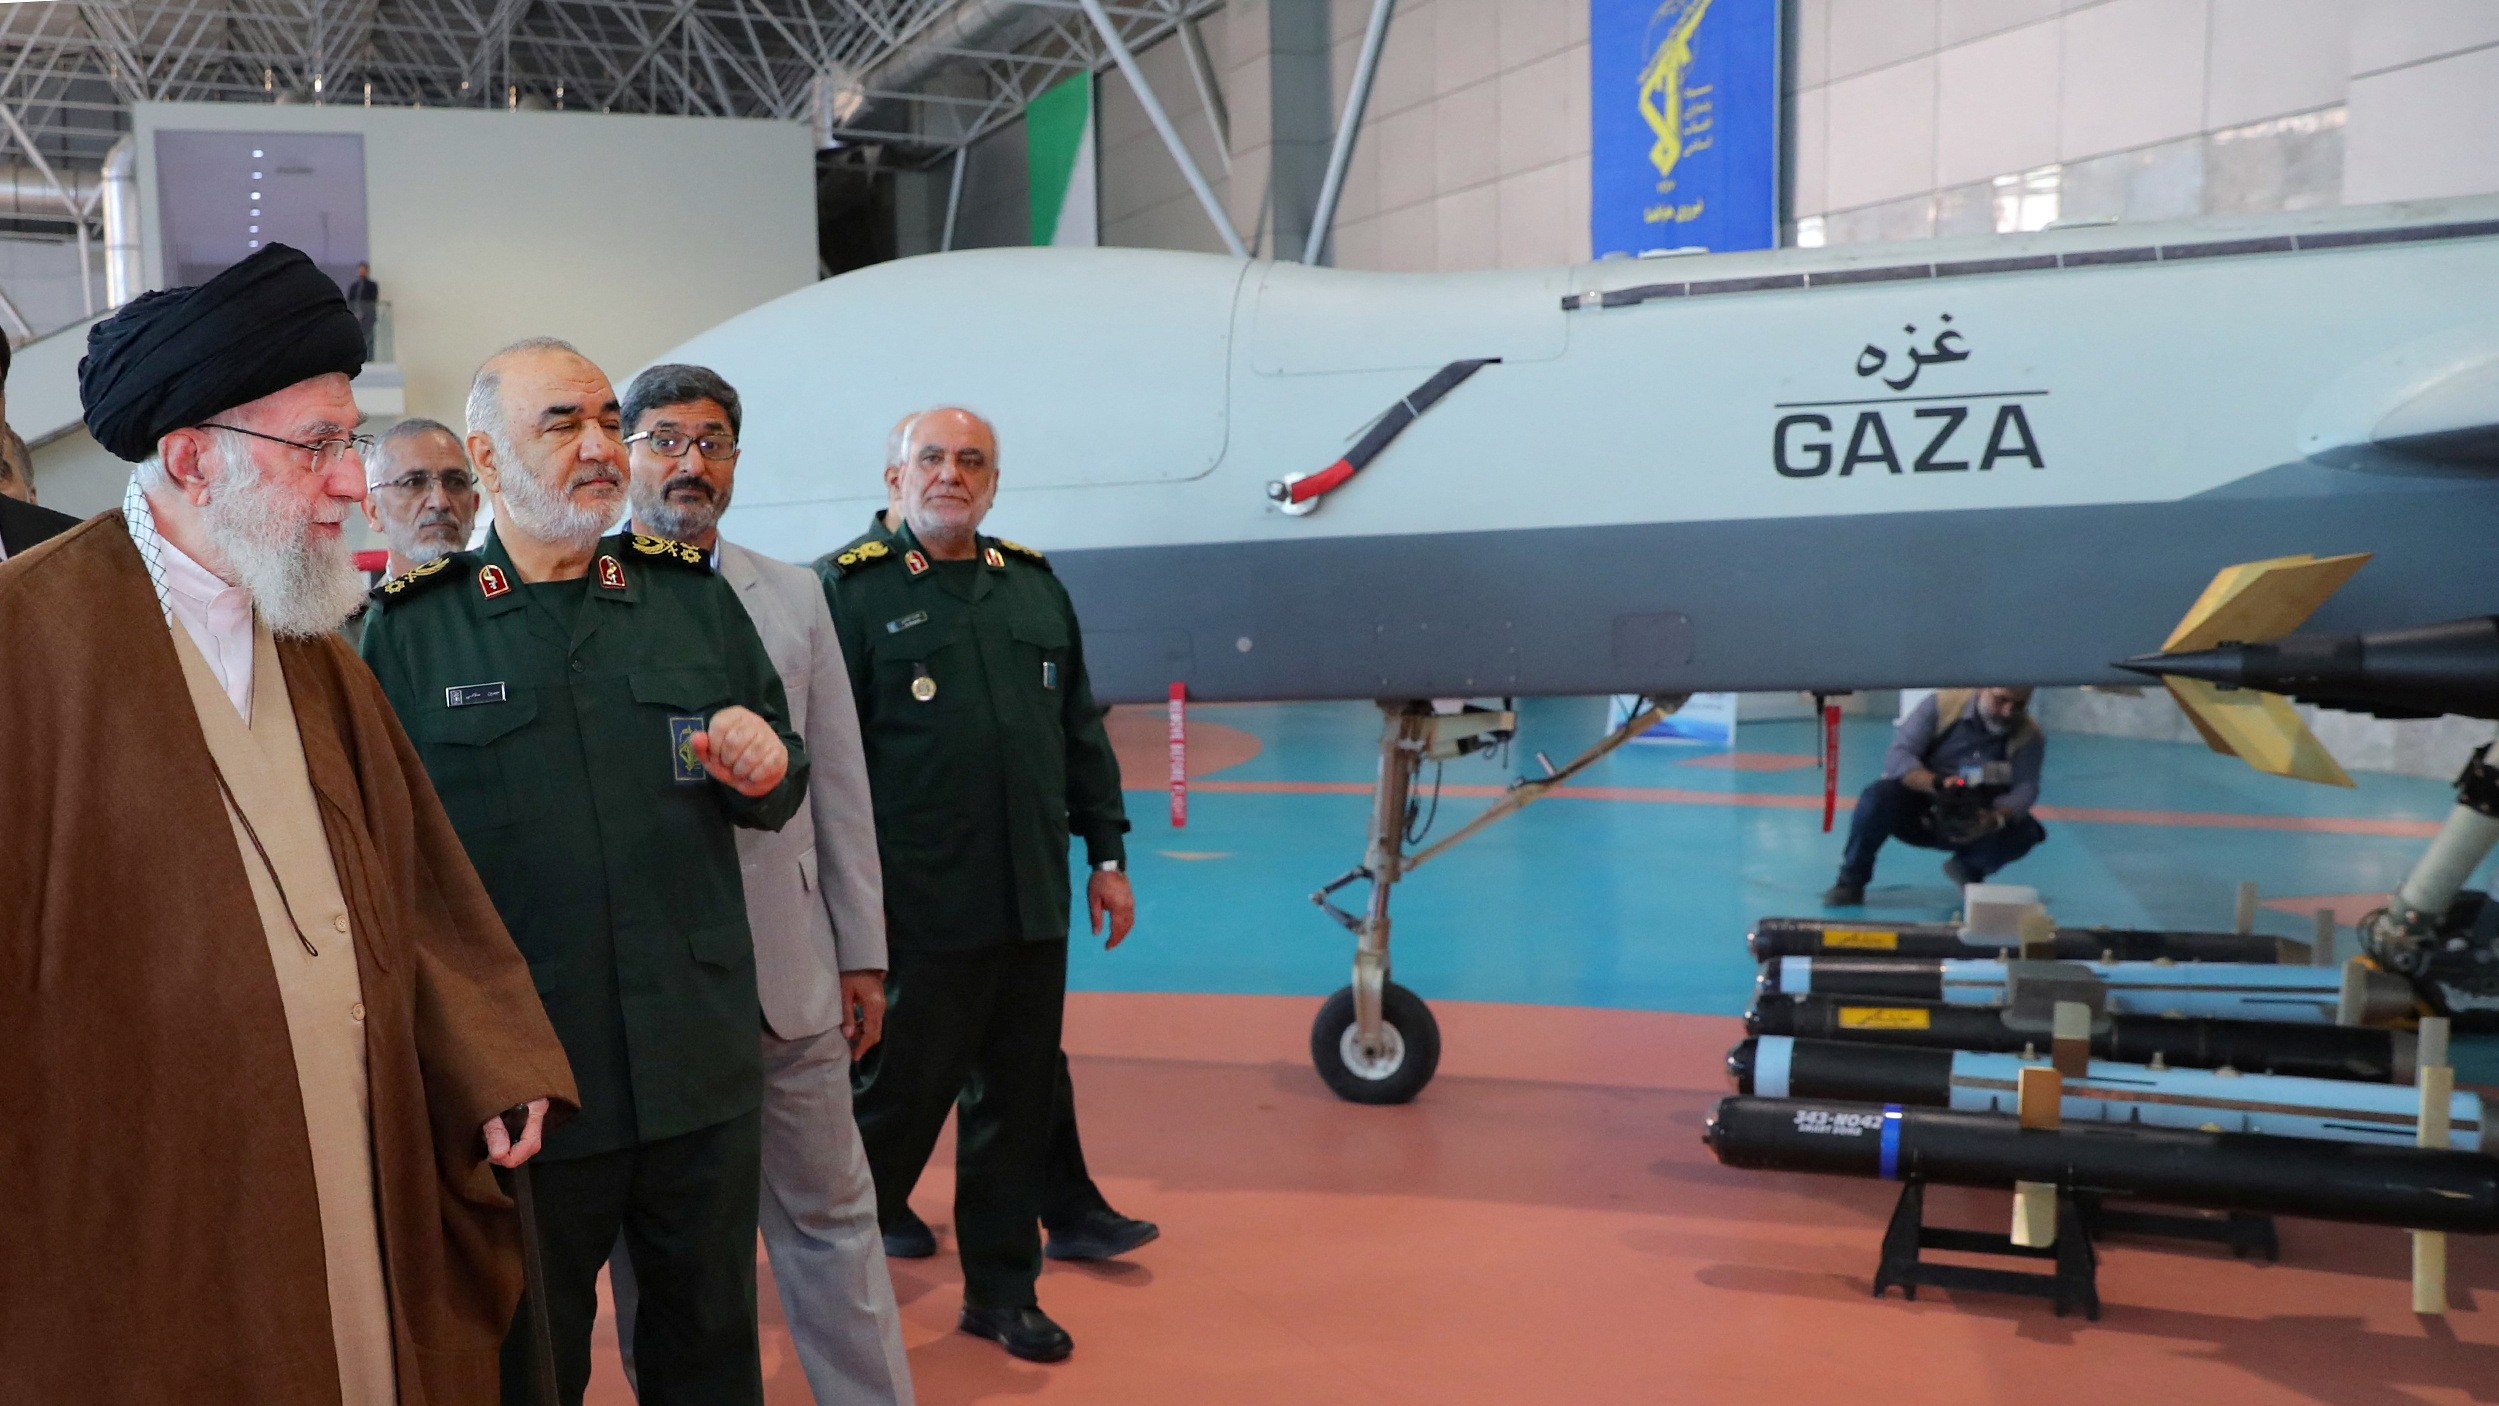 Iran's Supreme Leader Ali Khamenei looks at an Iranian drone during his visit to the IRGC Aerospace Force Achievements exhibition in Tehran, 19 November (Reuters)